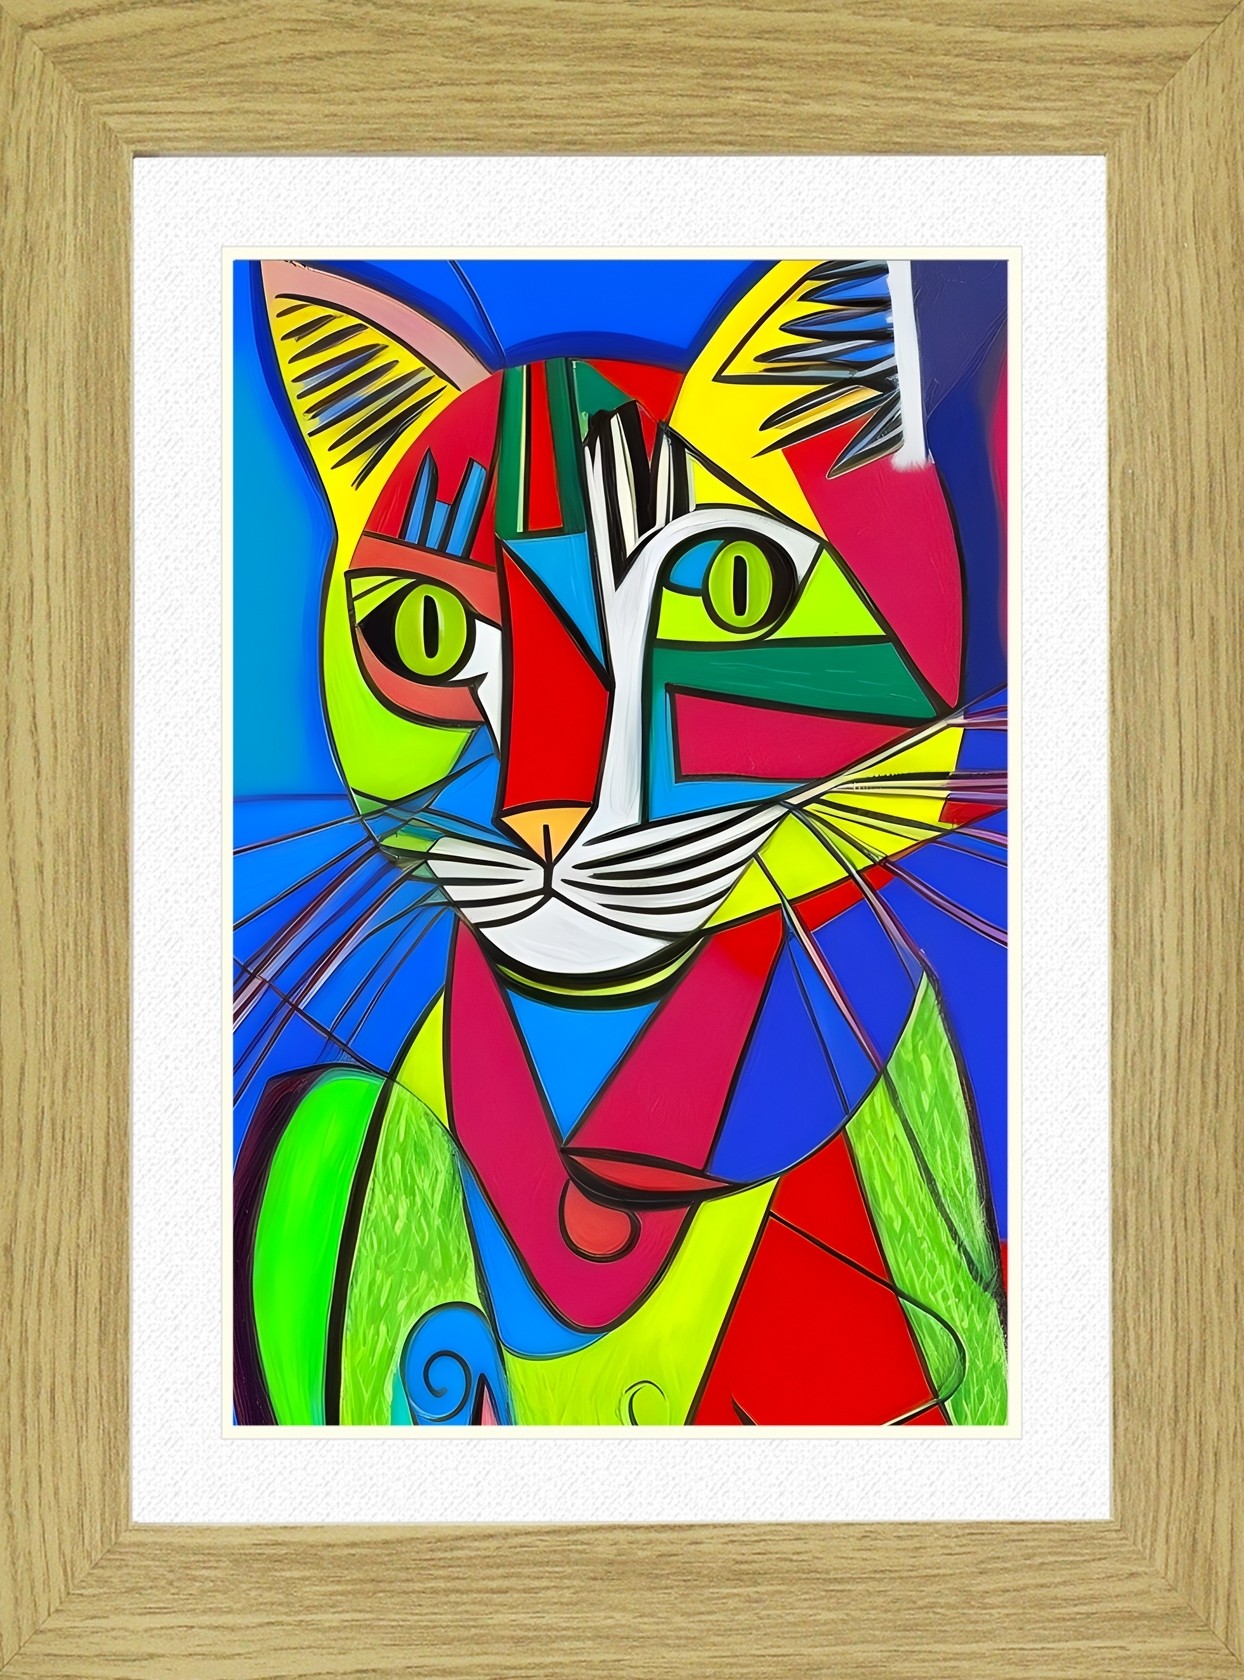 Cat Animal Picture Framed Colourful Abstract Art (A4 Light Oak Frame)